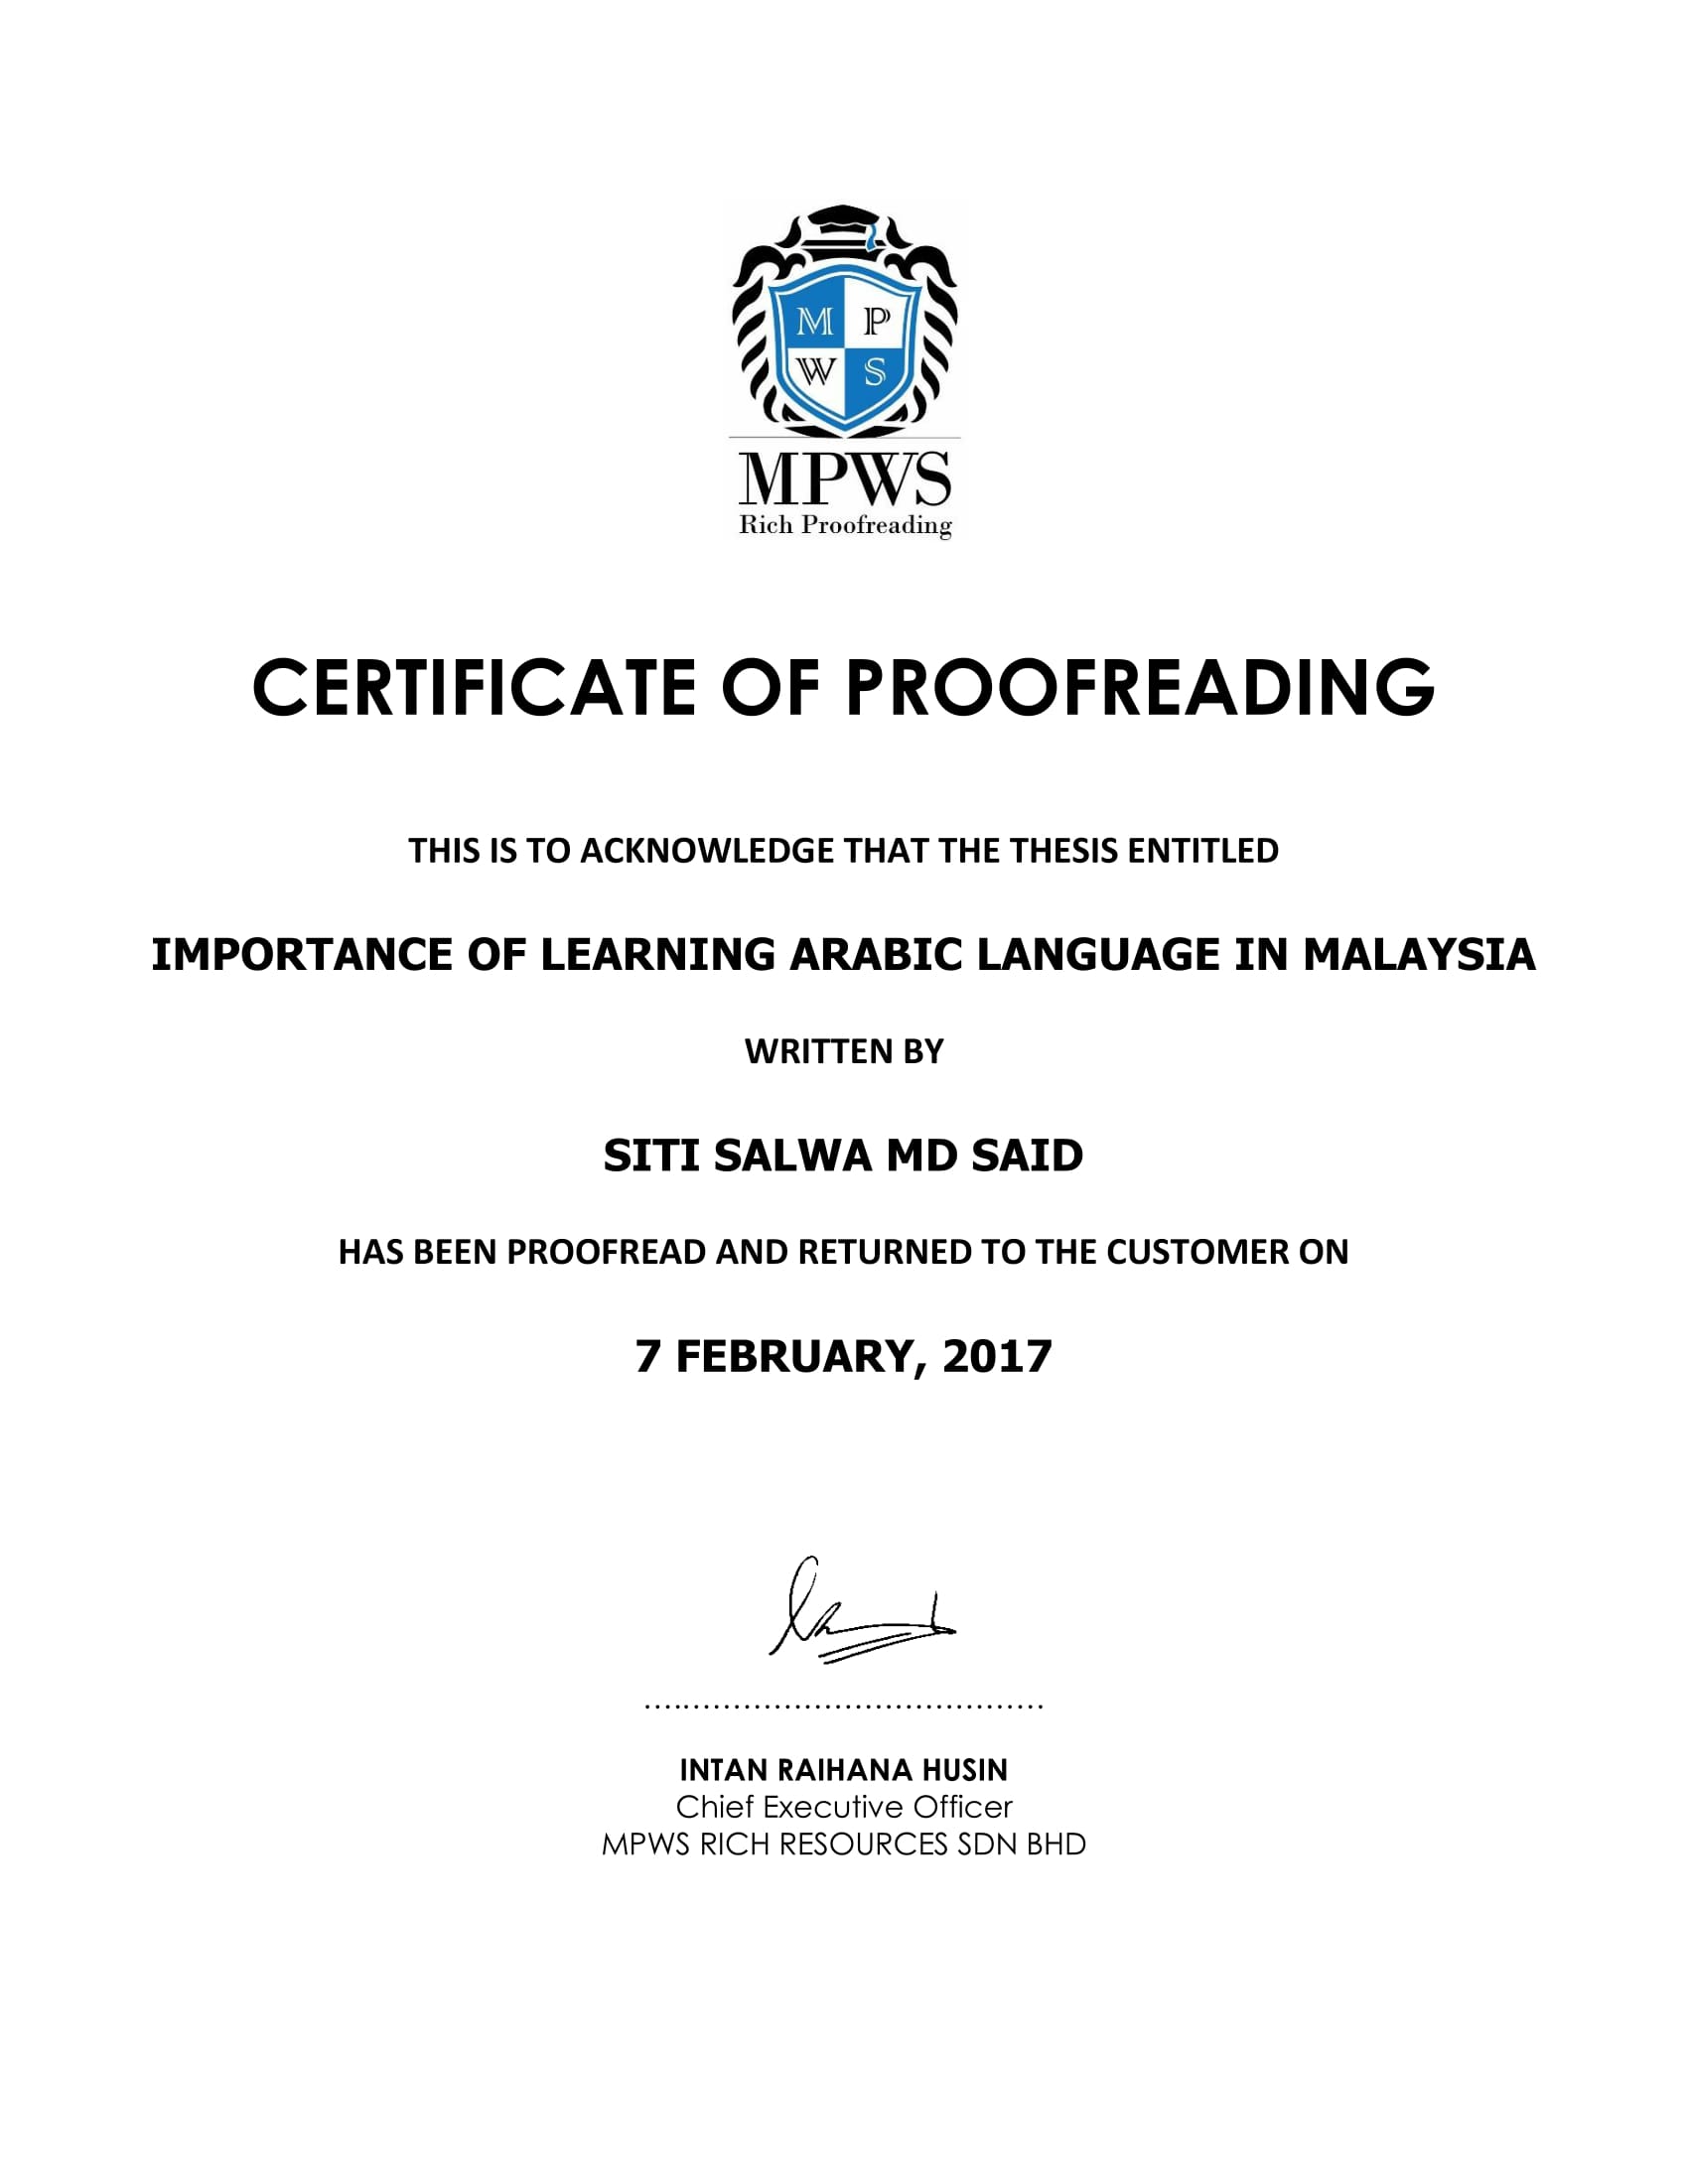 Proofreading services malaysia